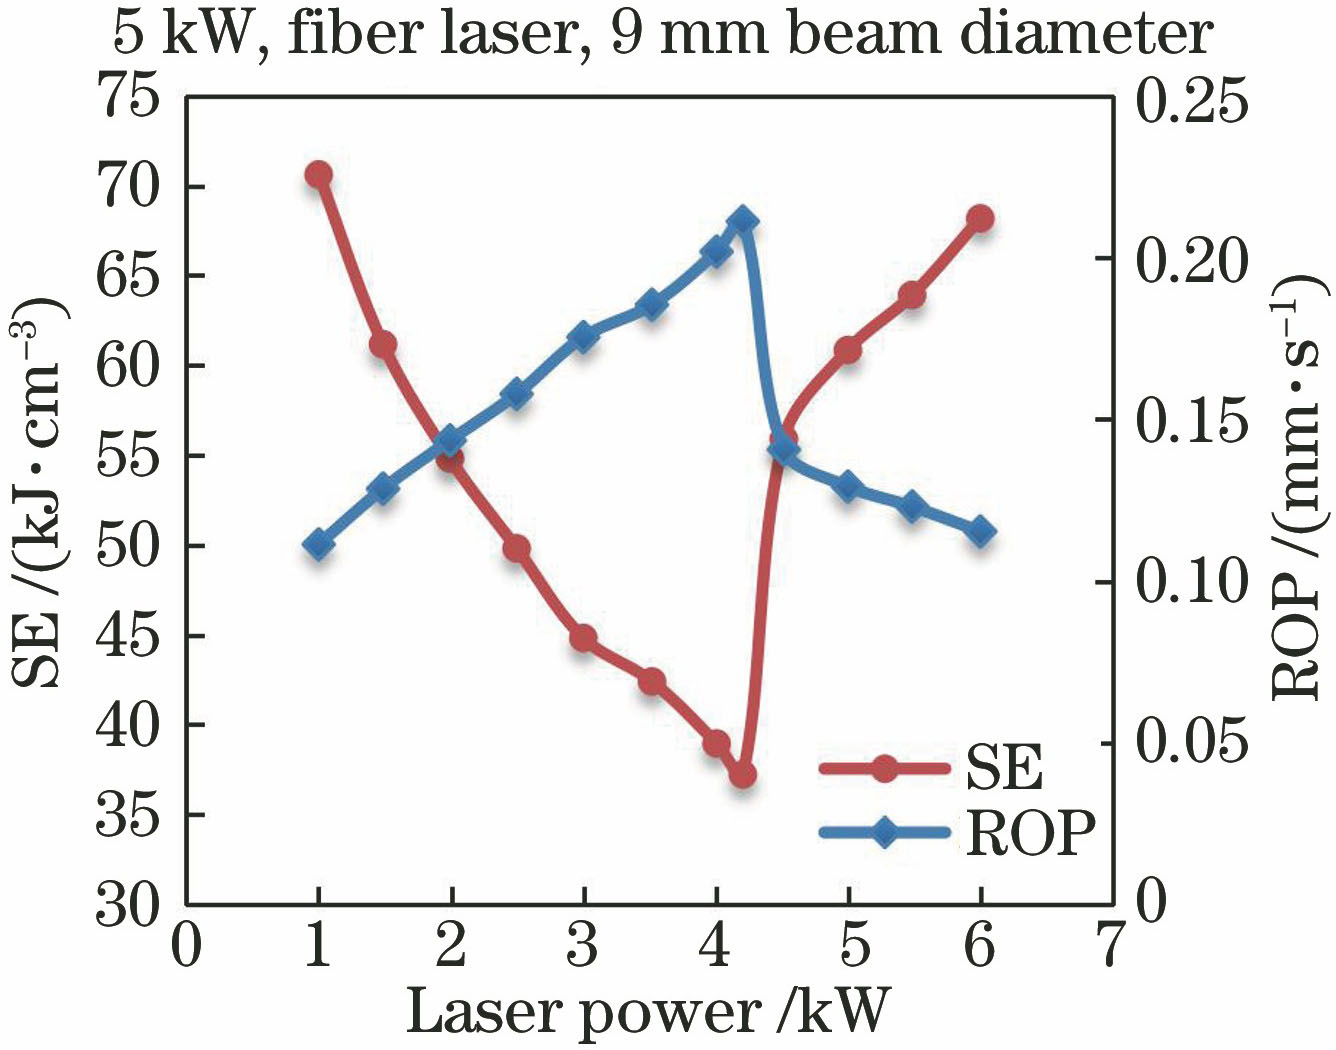 Effects of laser power on SE and ROP for limestone[29]